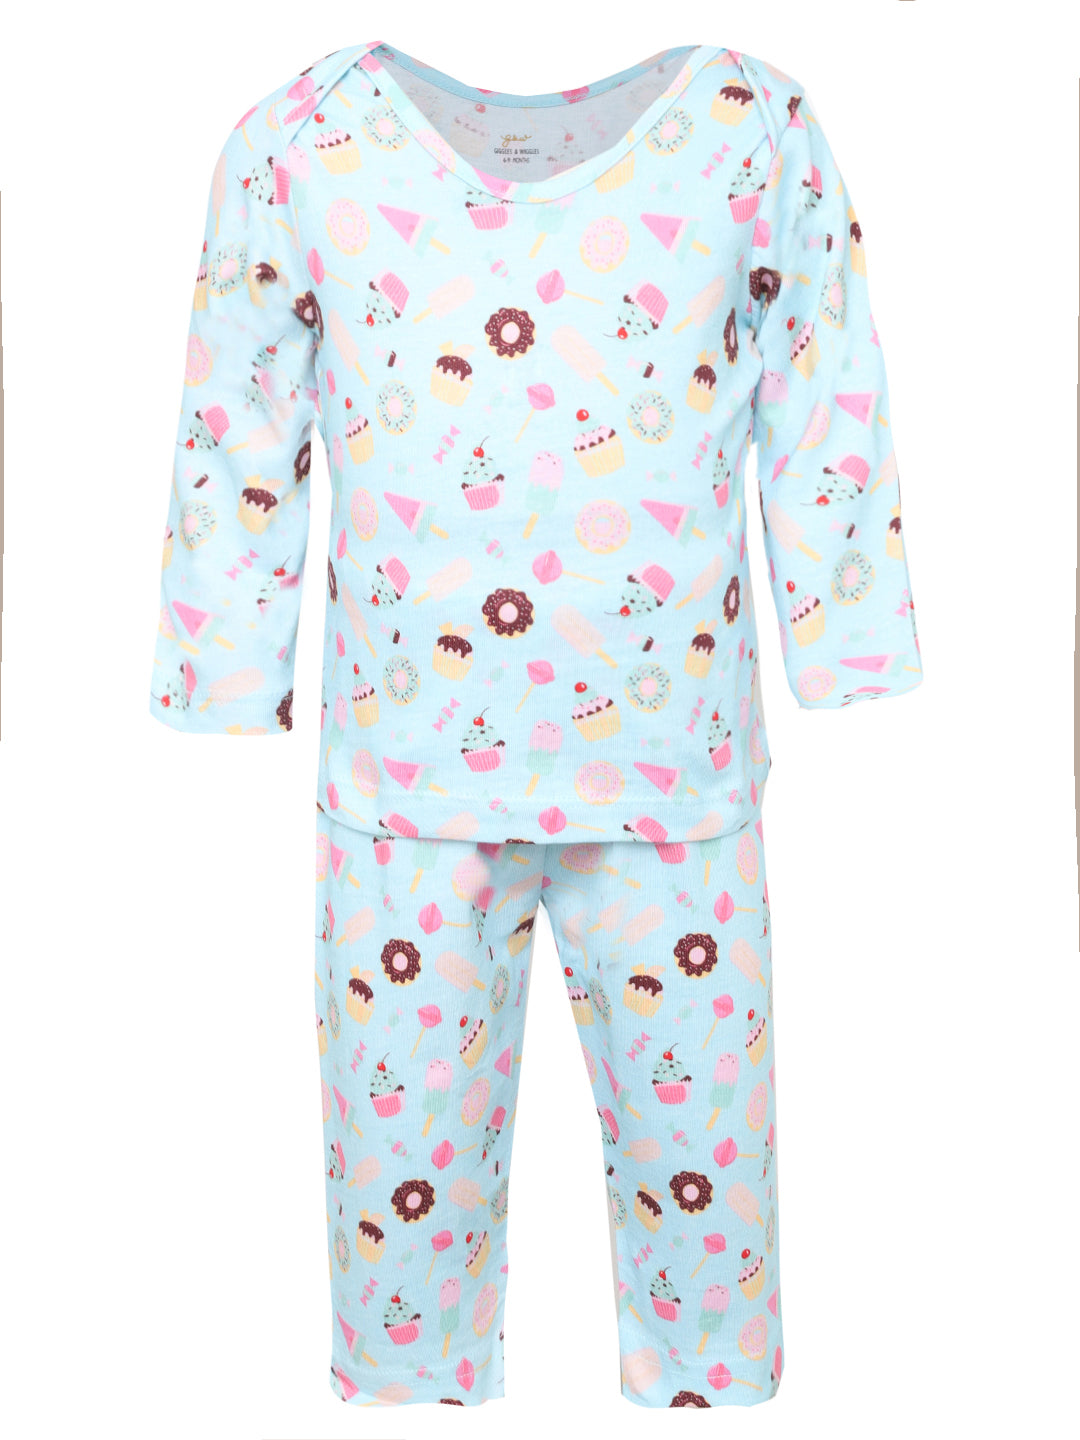 Sweet Dreams Soft Knit Cotton Night Suit Set – Giggles & Wiggles